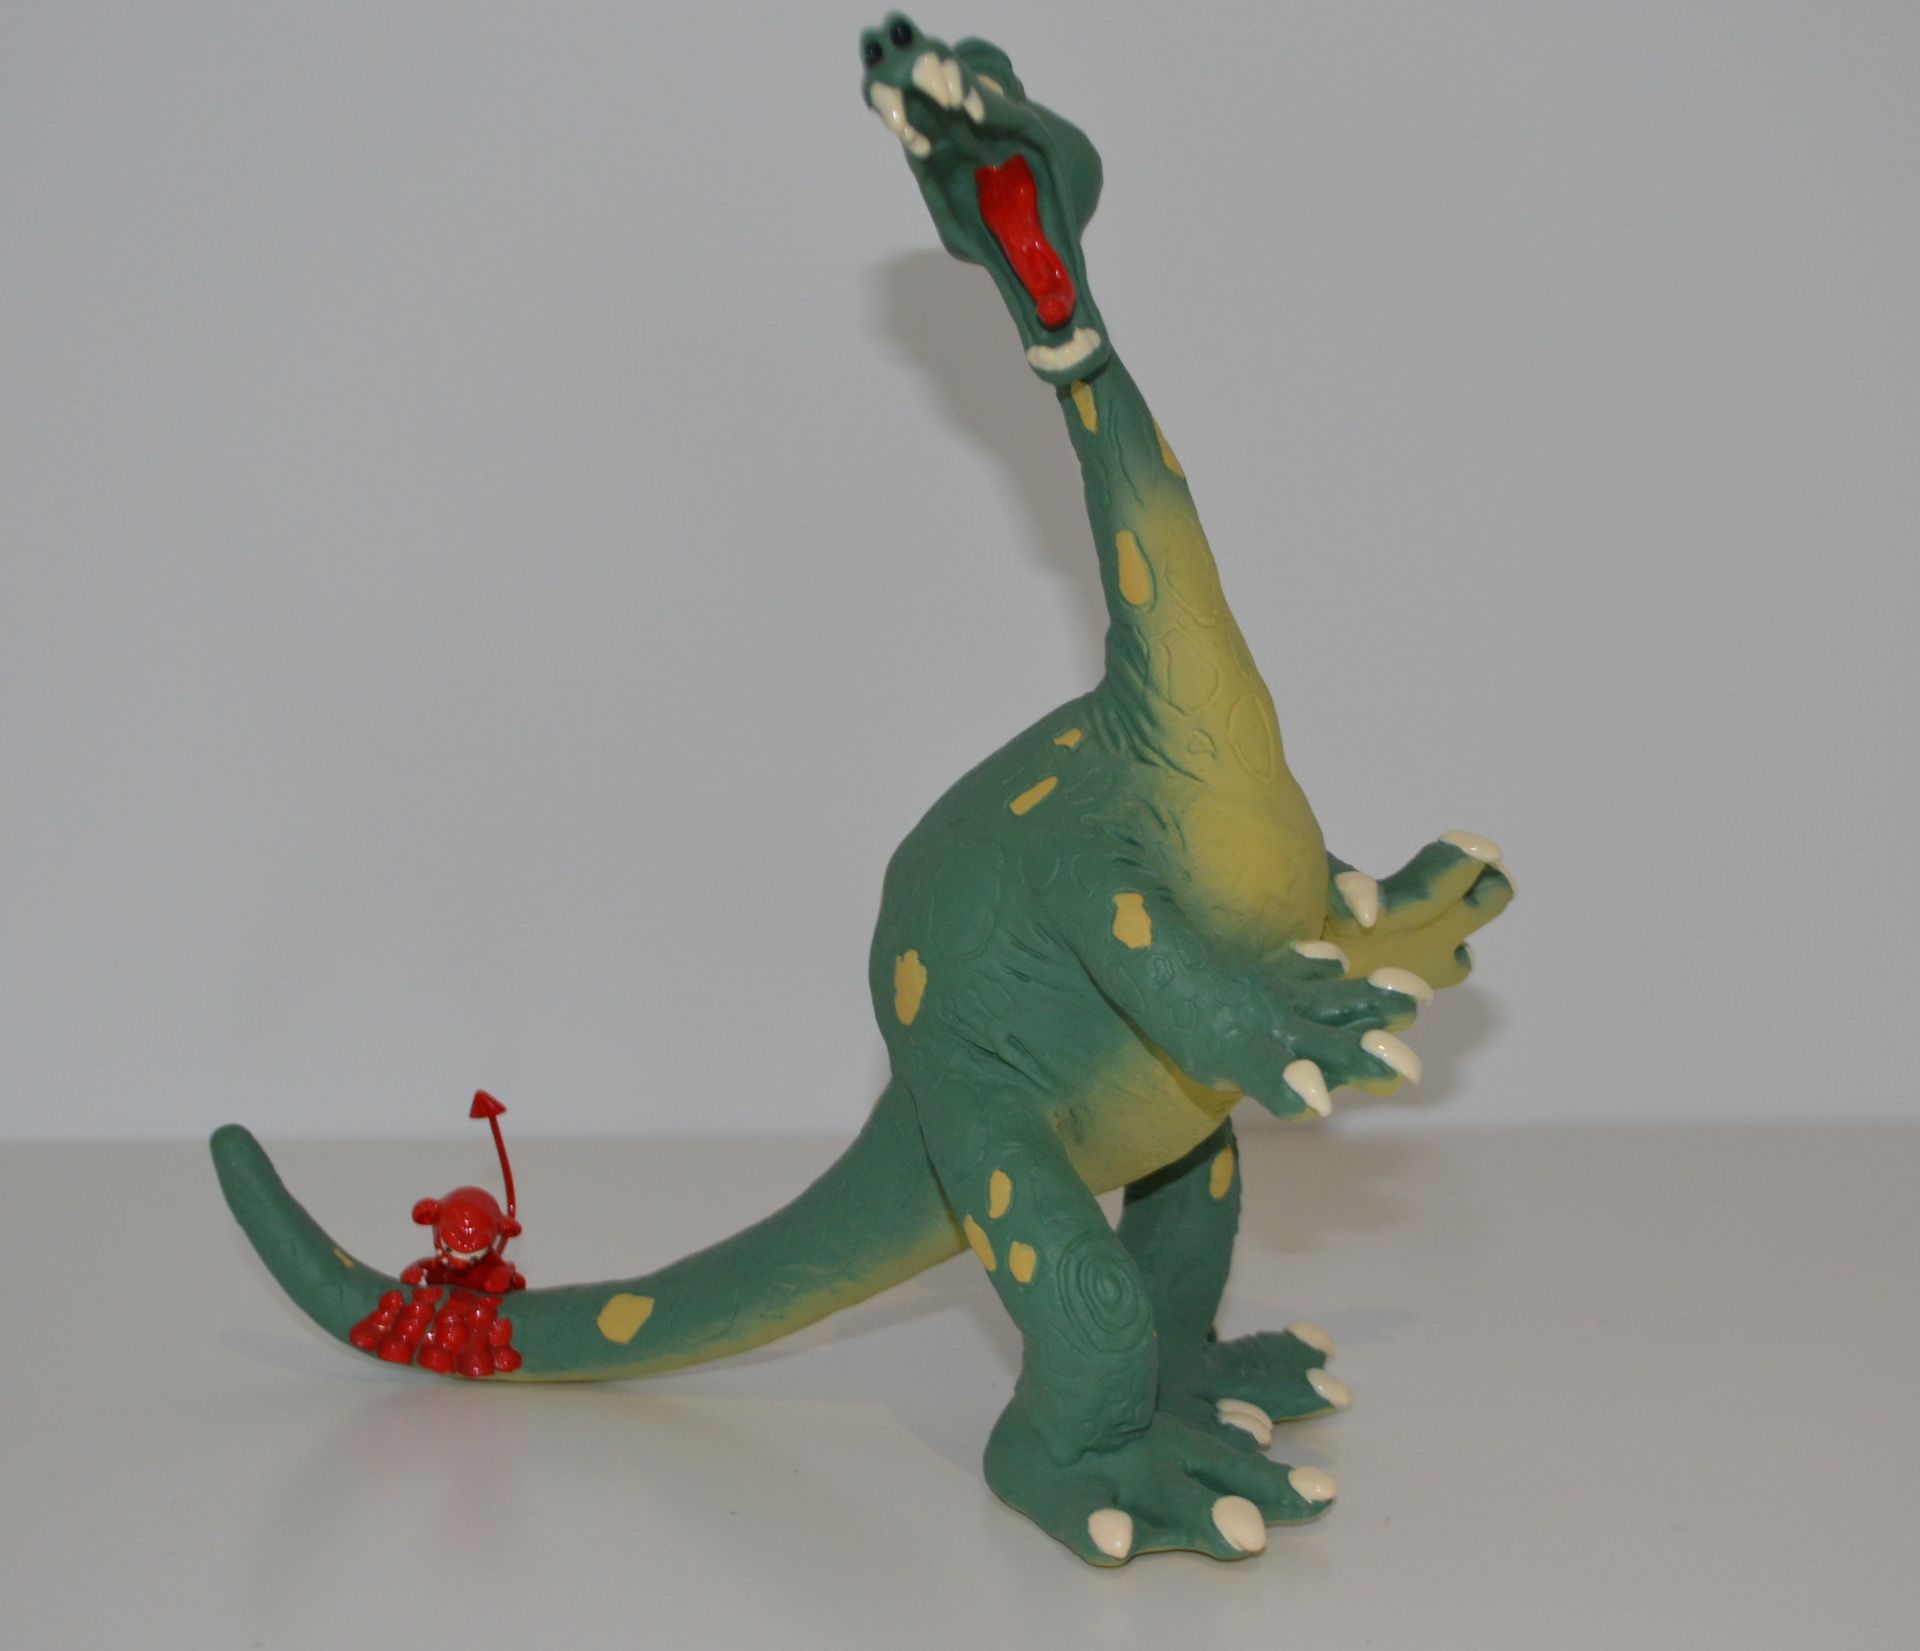 André FRANQUIN Resitec Resin The red monster attacks the dinosaur, 1996 after Le&hellip;